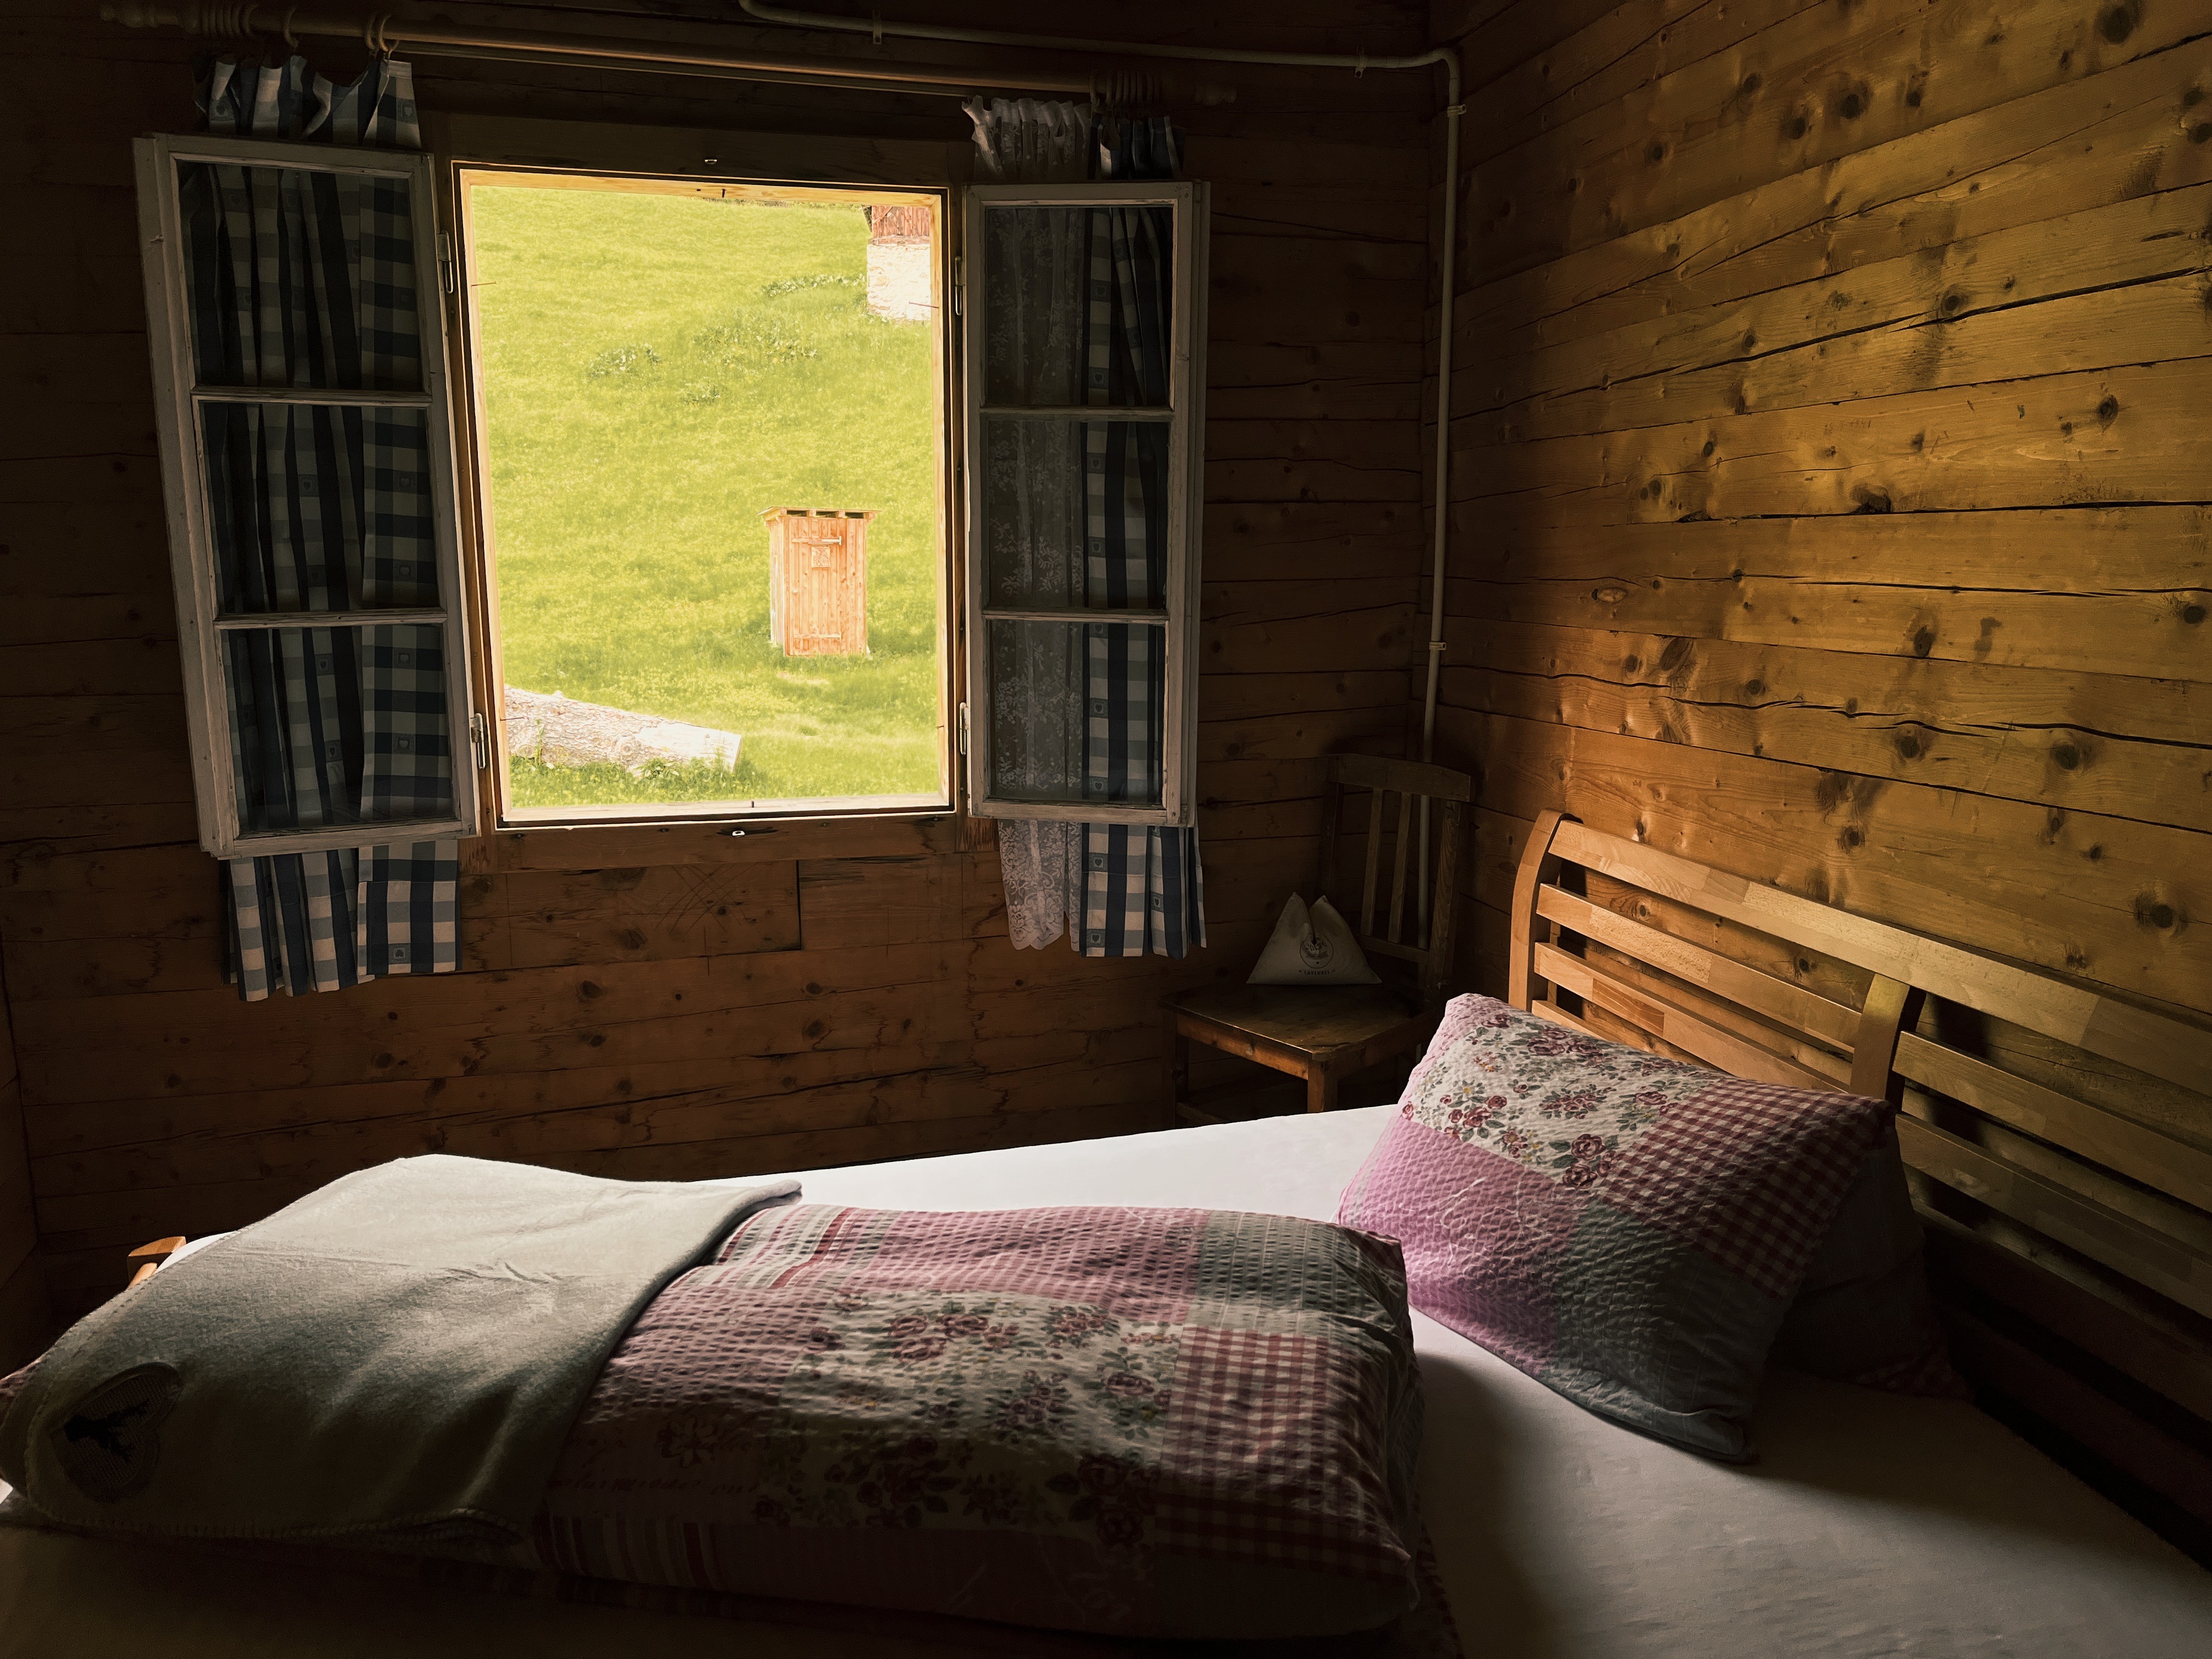 Room in Alpengasthaus Marterle on the Alpe Adria Trail